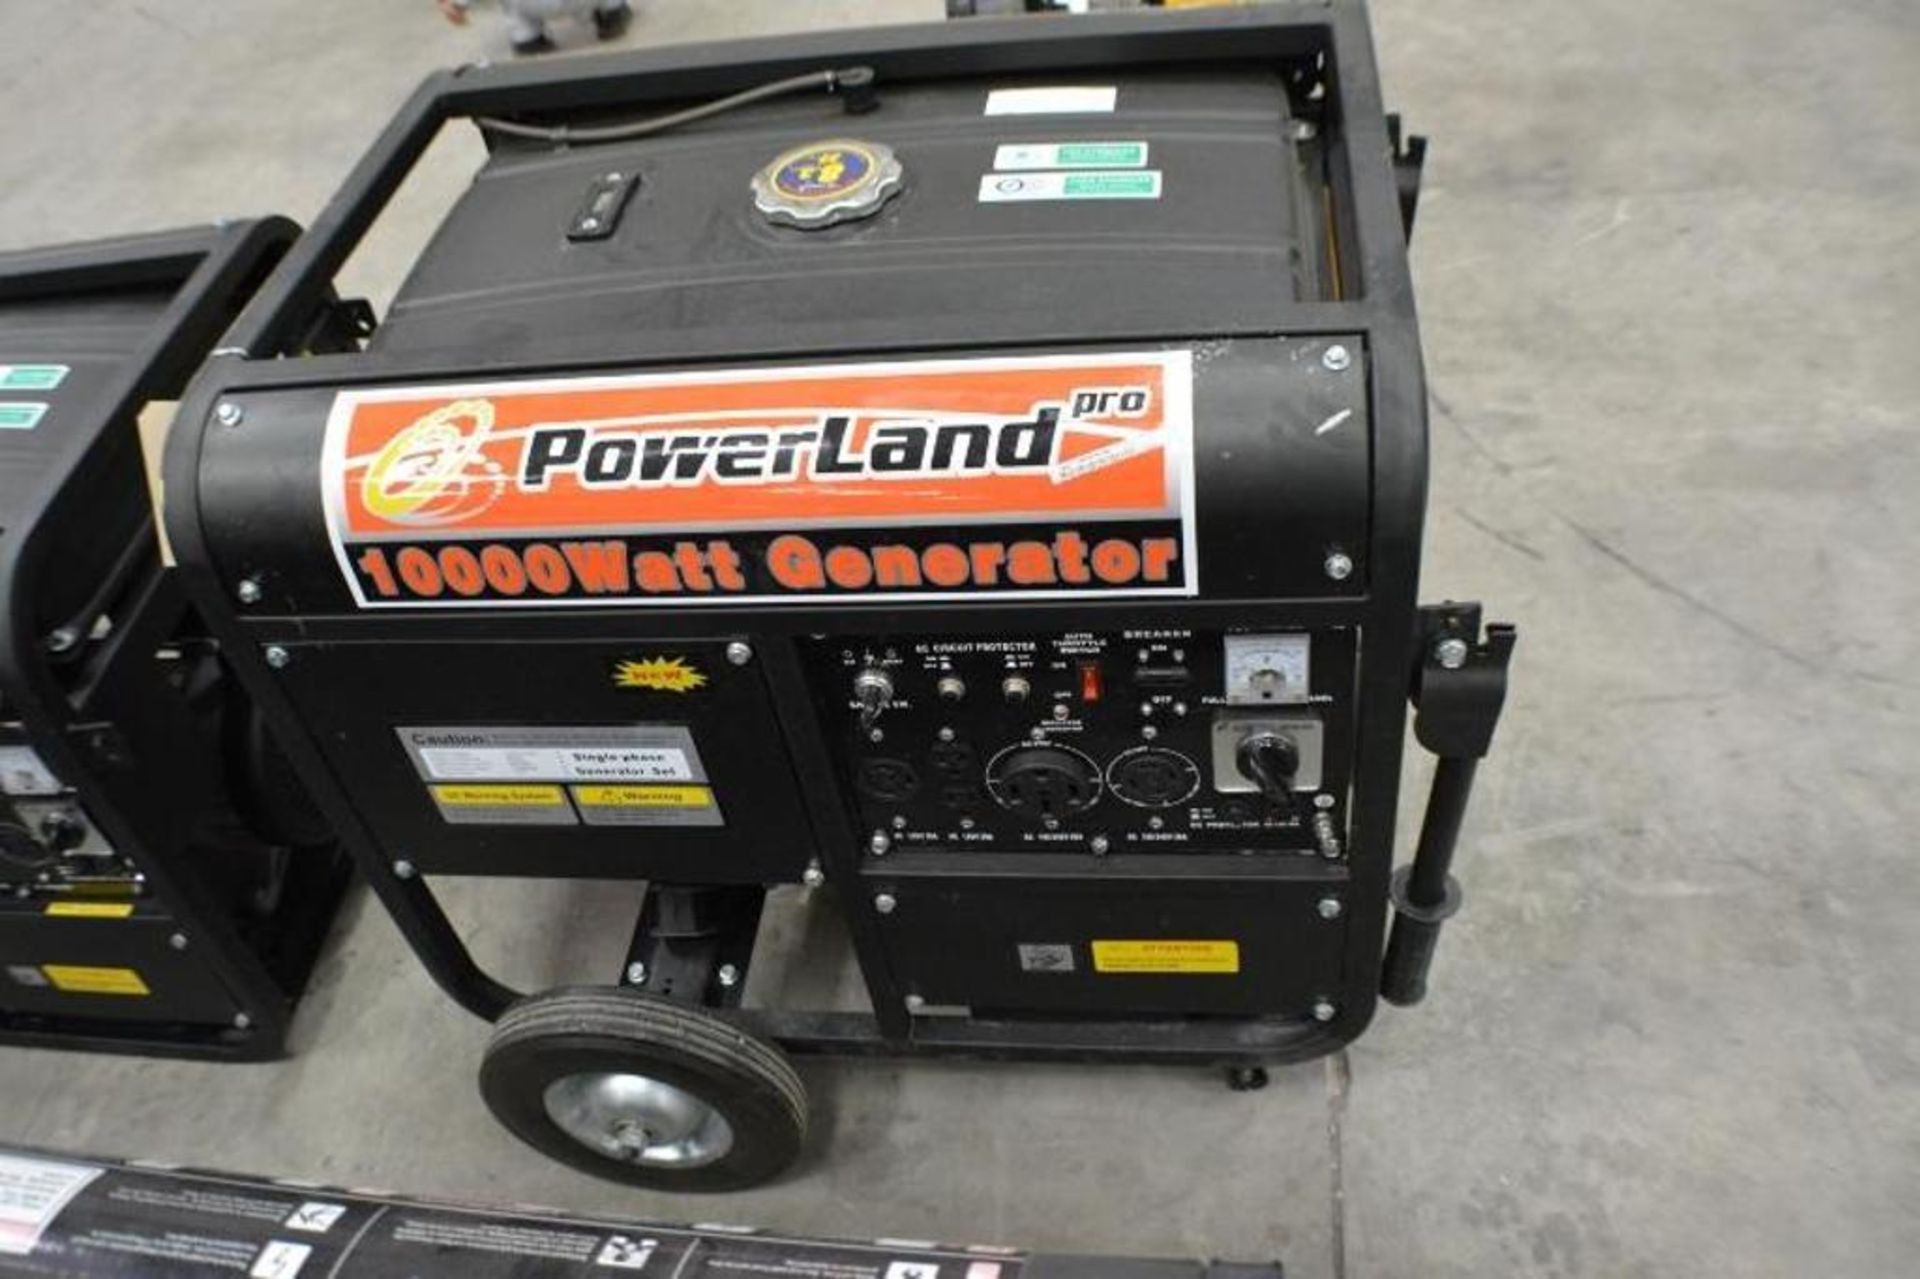 10000 Watts Gasoline Generator 16.0 HP with Electric Start Single Phase 120/240 Volts by Powerland